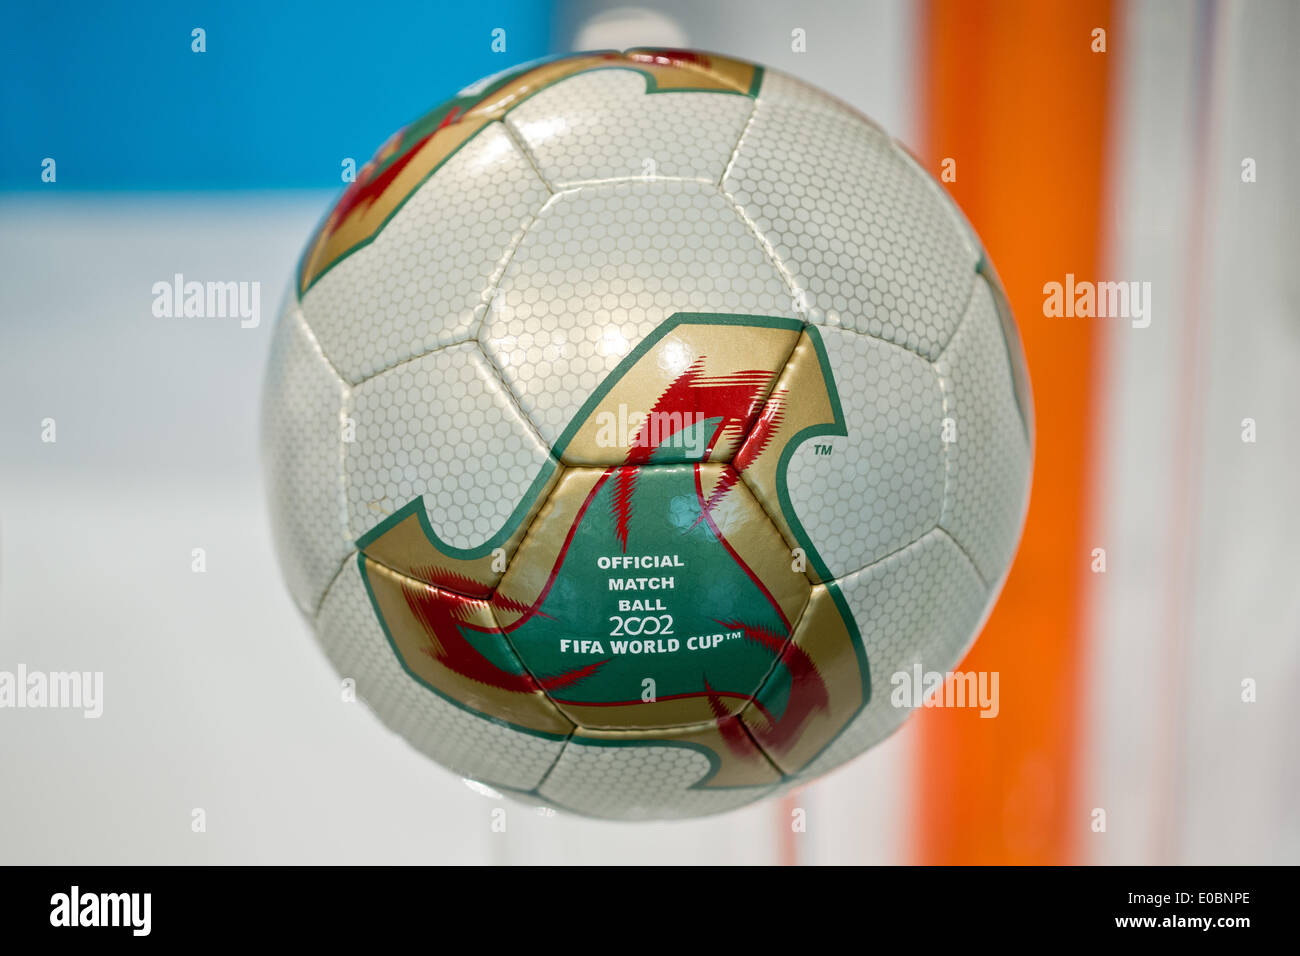 Fuerth, Germany. 08th May, 2014. The 'Fevernova' soccer ball which was the official ball of the 2002 soccer world cup in South Korea is pictured during the general meeting of sporting goods manufacturer adidas in Fuerth, Germany, 08 May 2014. Photo: DANIEL KARMANN/dpa/Alamy Live News Stock Photo